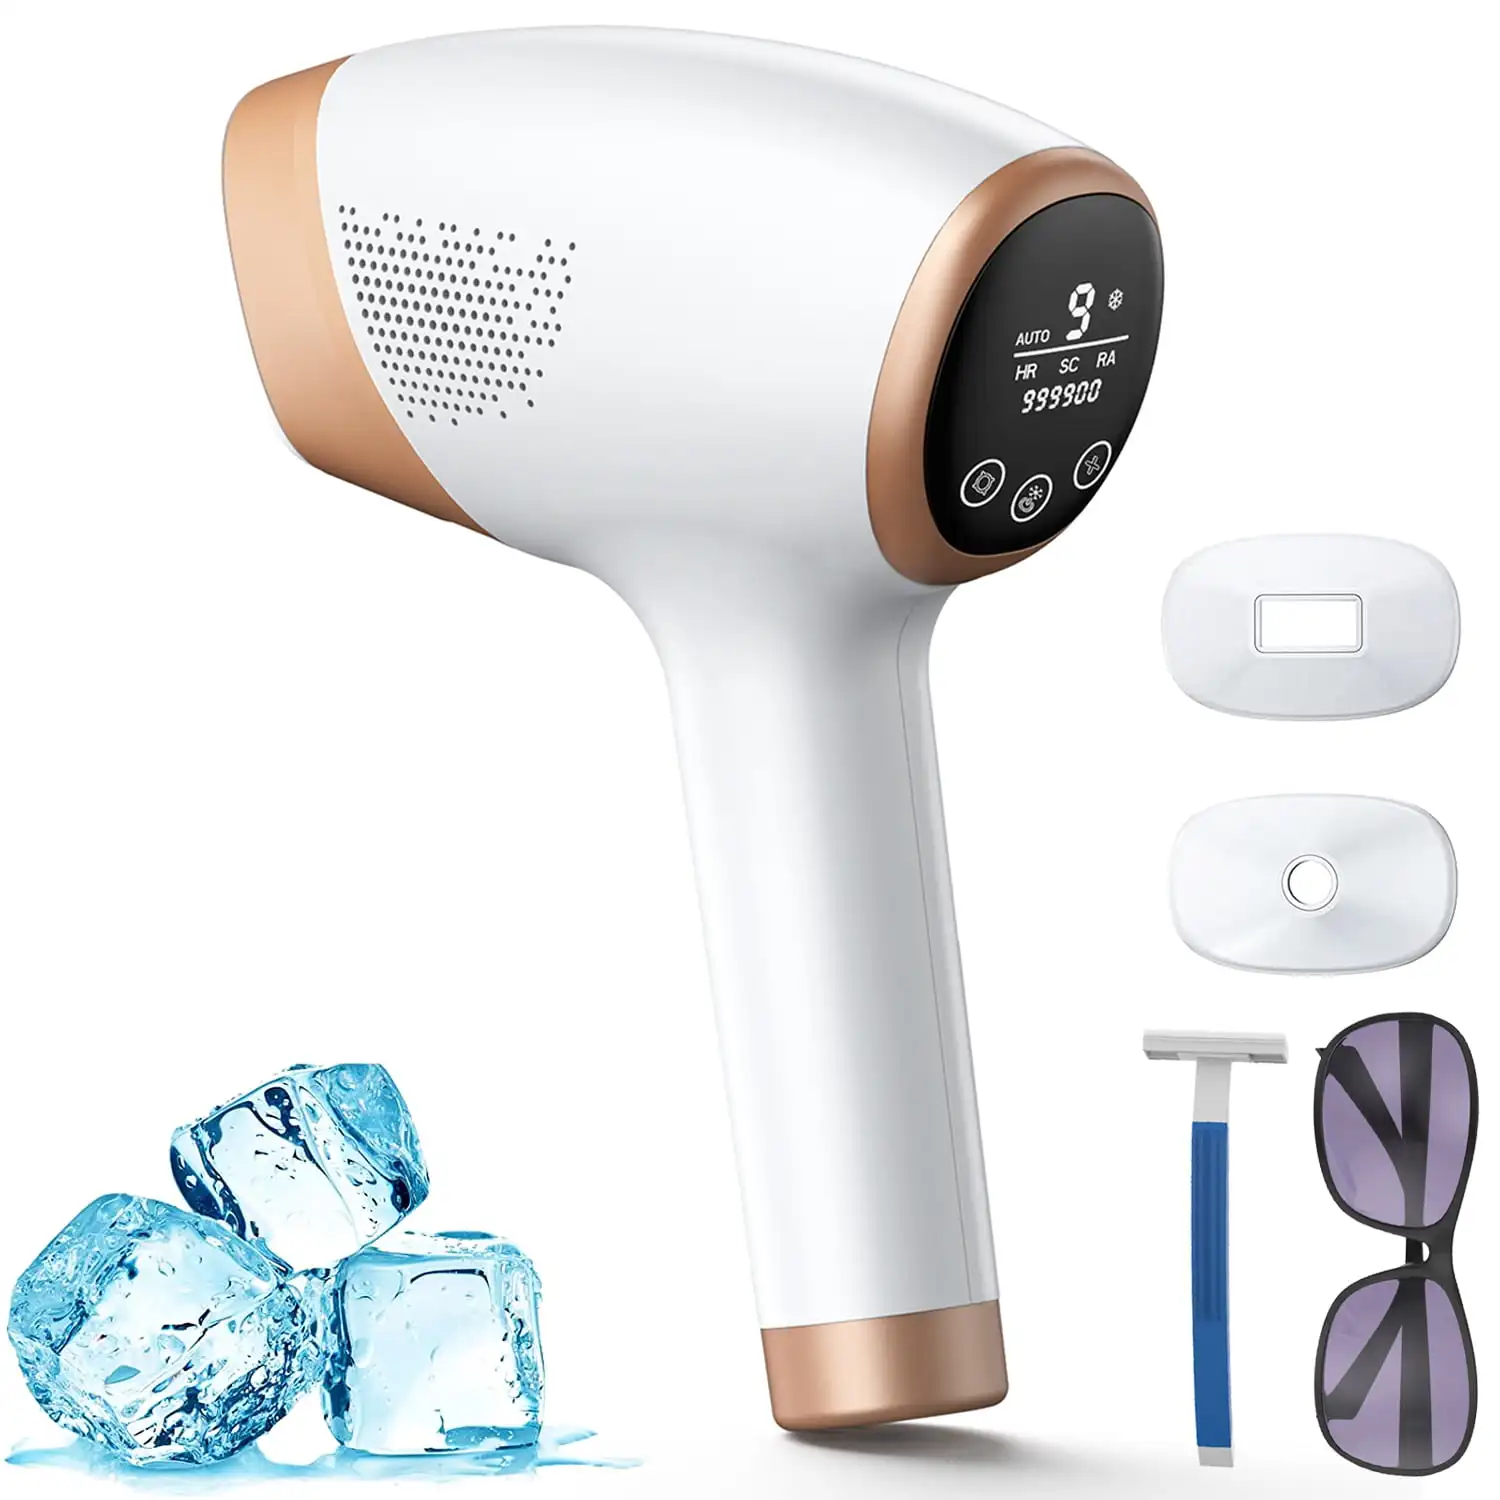 IPL Laser Hair Removal 999900 Flashes 9 Levels Permanent Painless Hair Removal with Sapphire Cooling